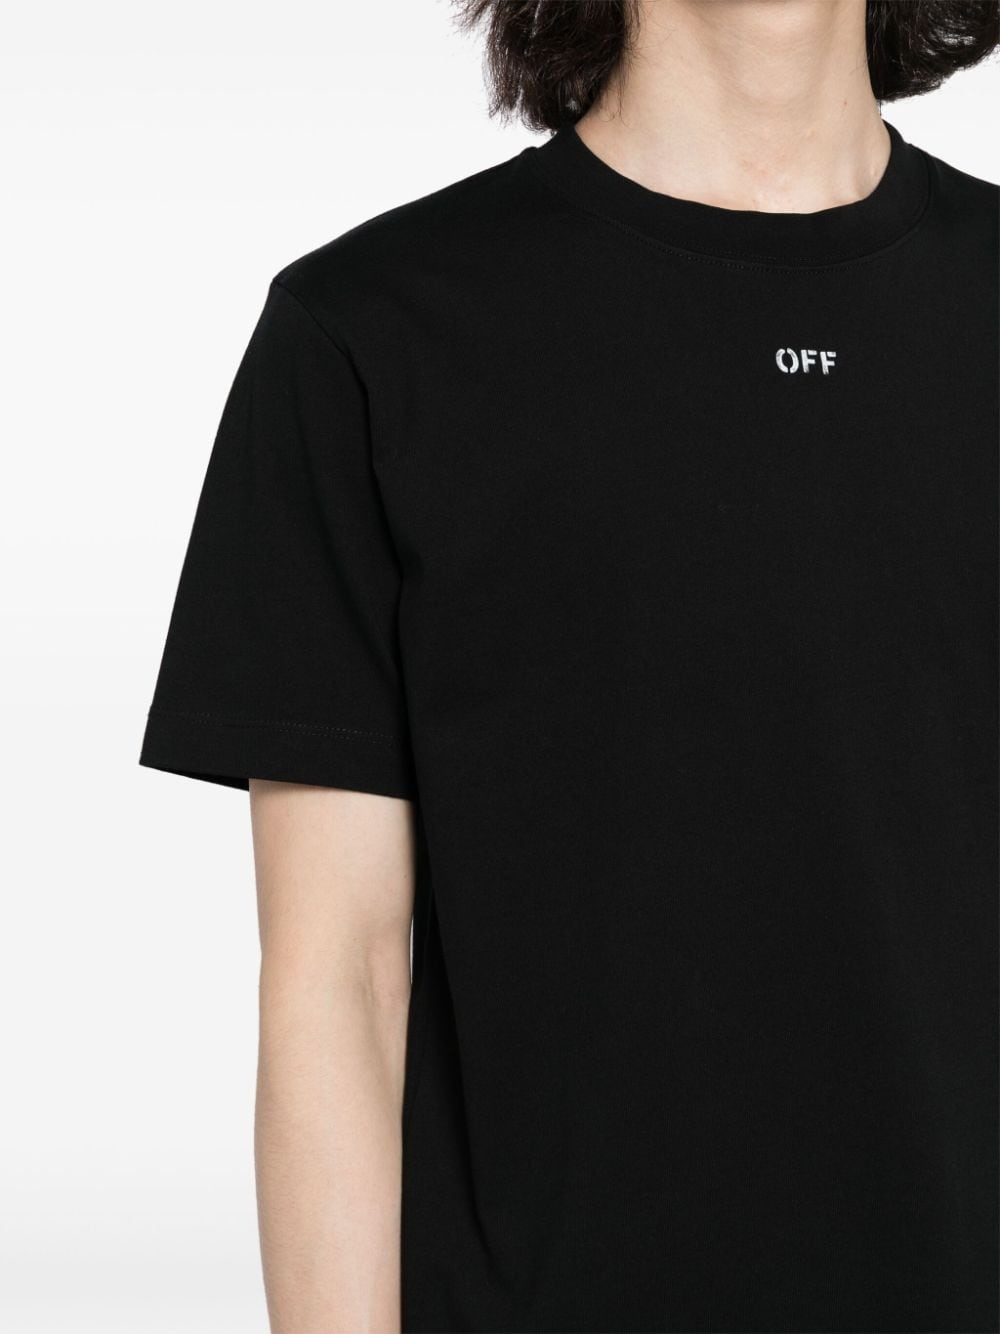 OW Off Stamp cotton T-shirt - 5